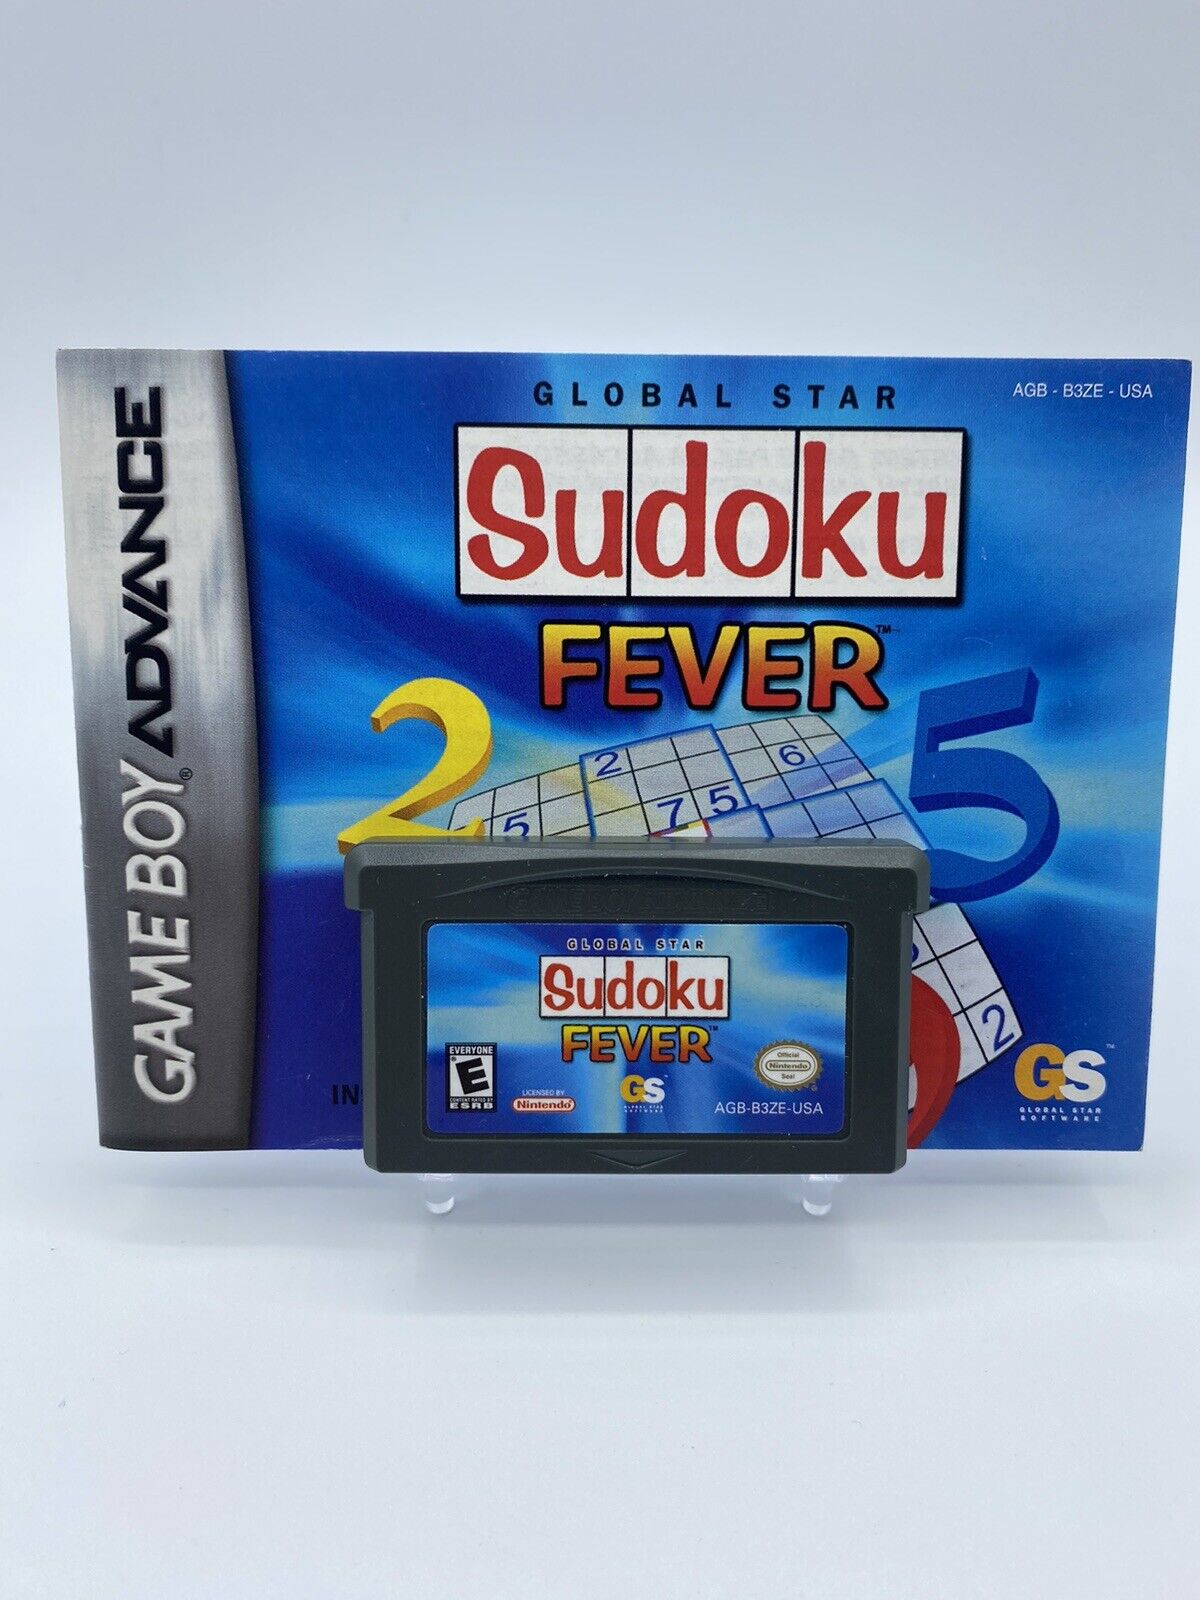 Sudoku Fever Game Boy Advance - Manual Included!